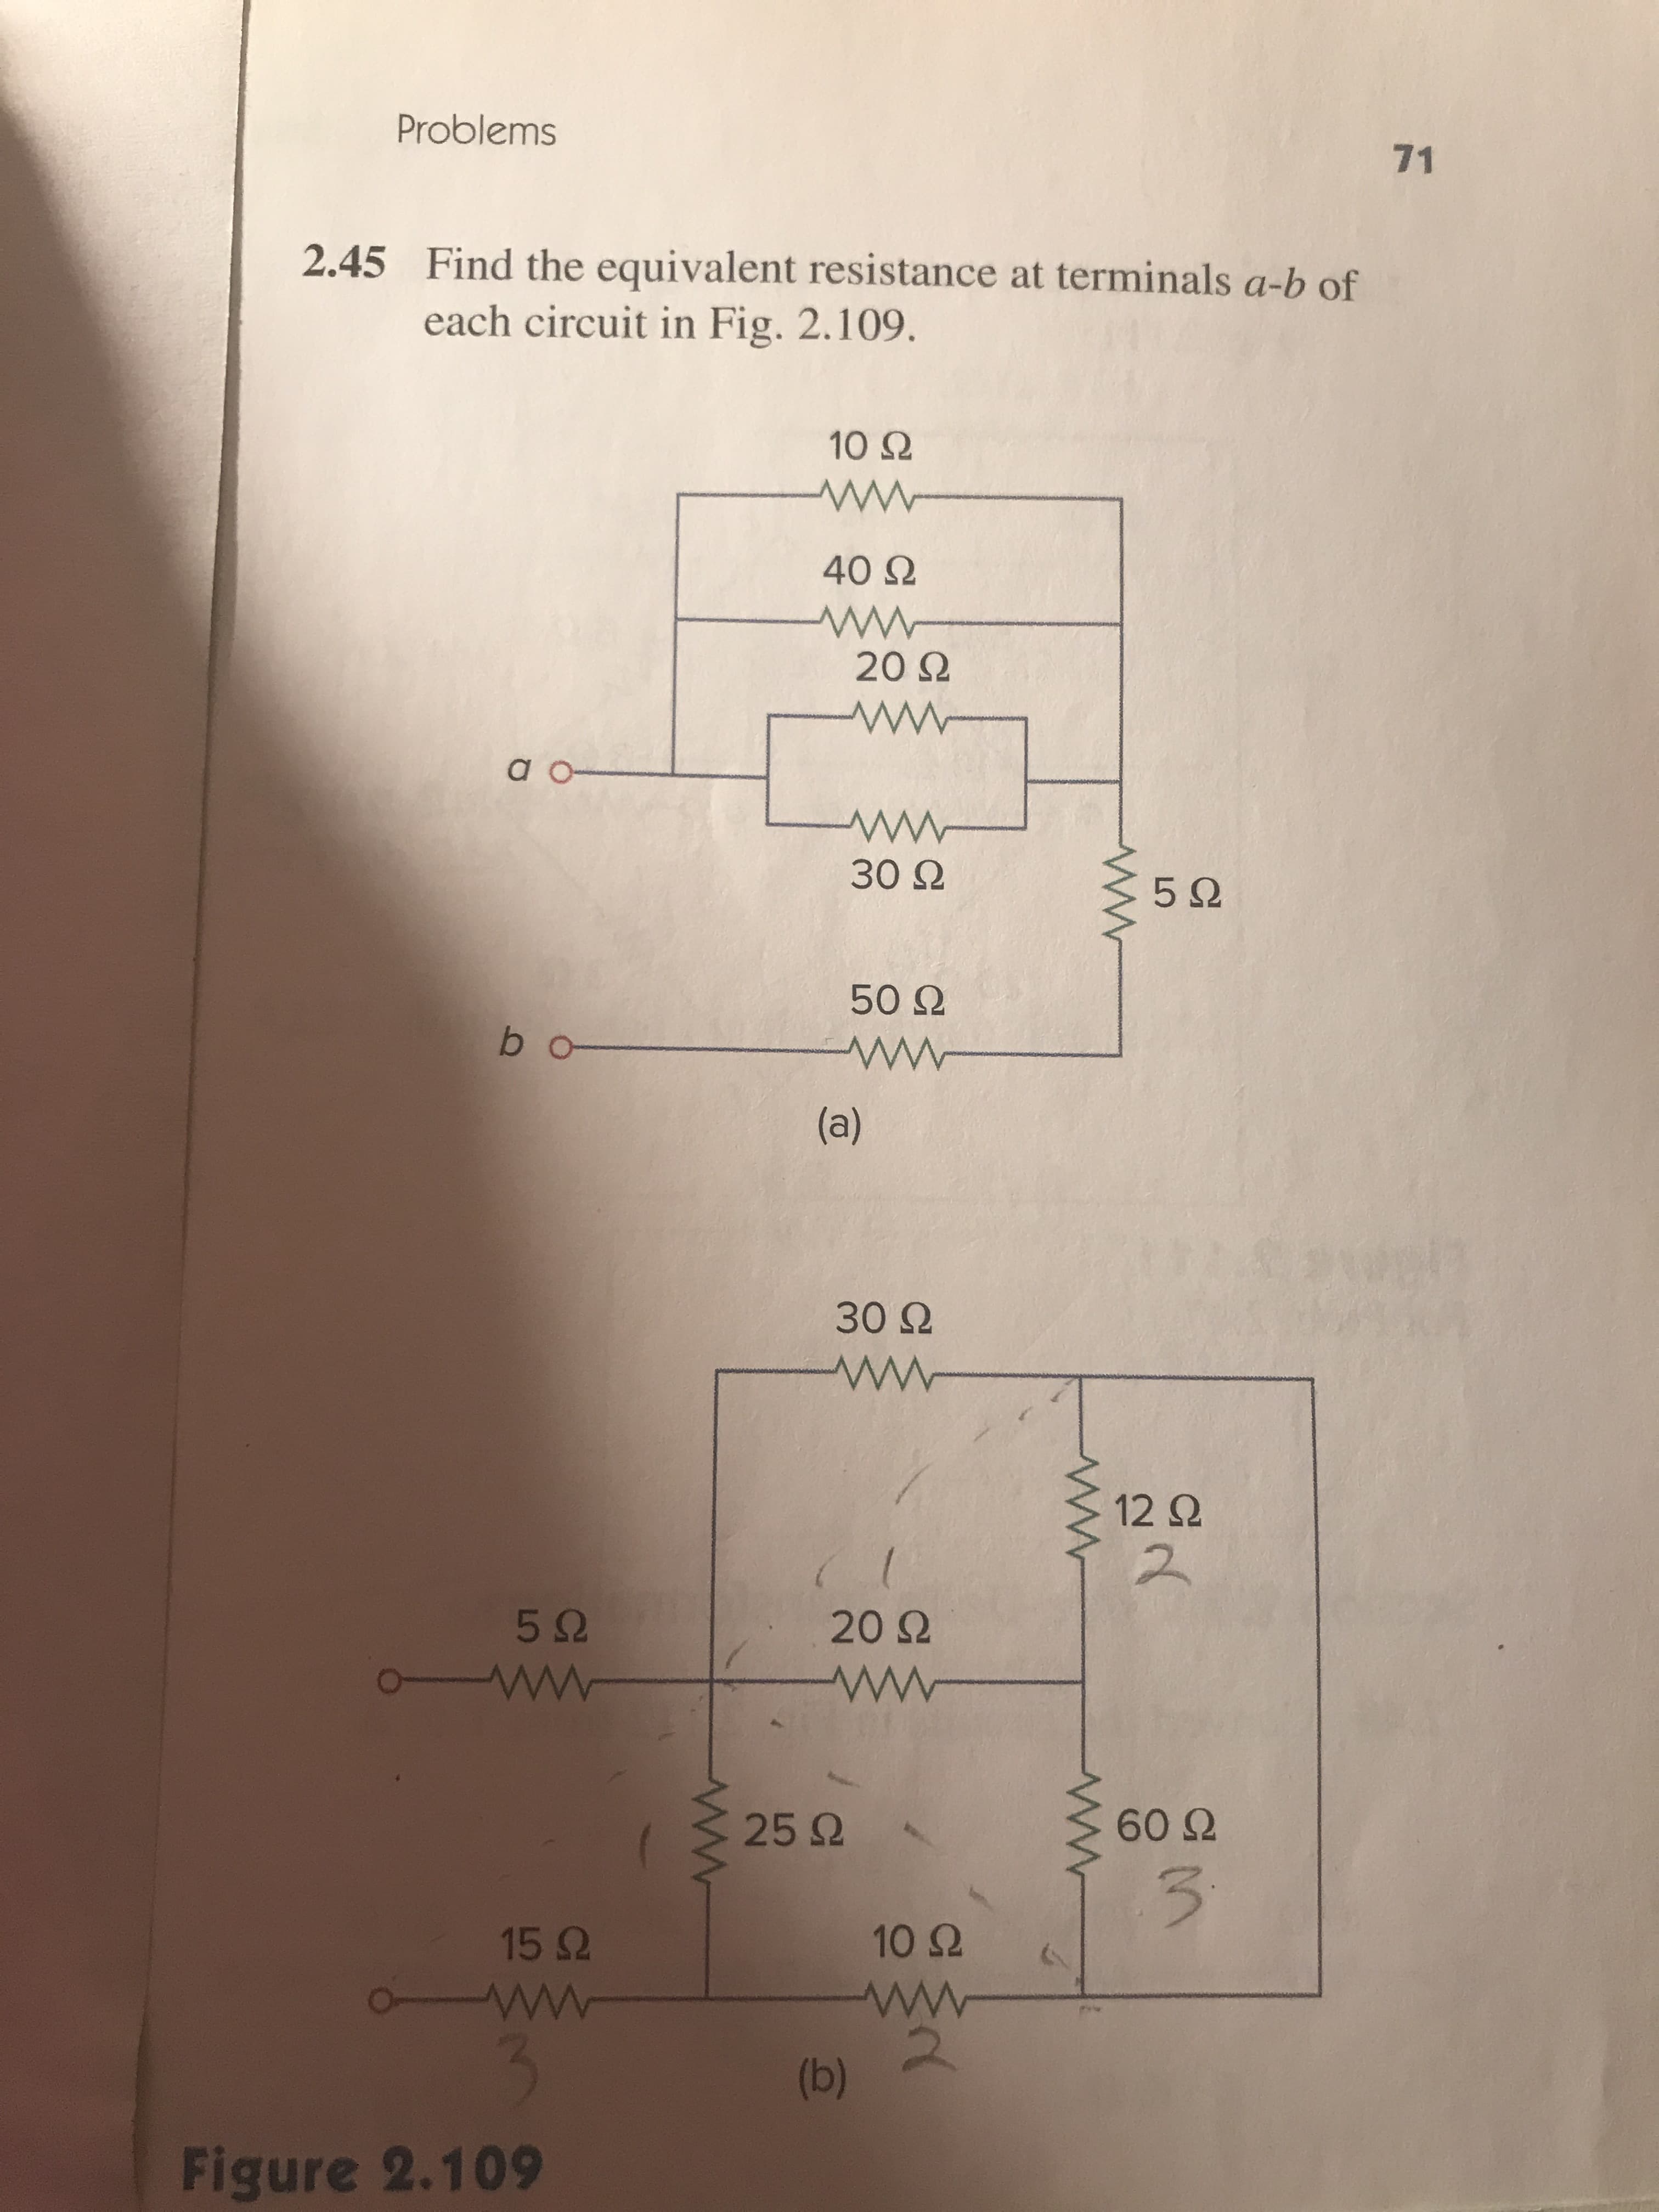 Problems
71
Find the equivalent resistance at terminals a-b of
each circuit in Fig. 2.109.
2.45
10Ω
40Ω
20 Ω
a o
30 Ω
5Ω
50Ω
30Ω
12Ω
2
5Ω
20Ω
25 Ω .
60Ω
15Ω
10Ω
Figure 2.109
